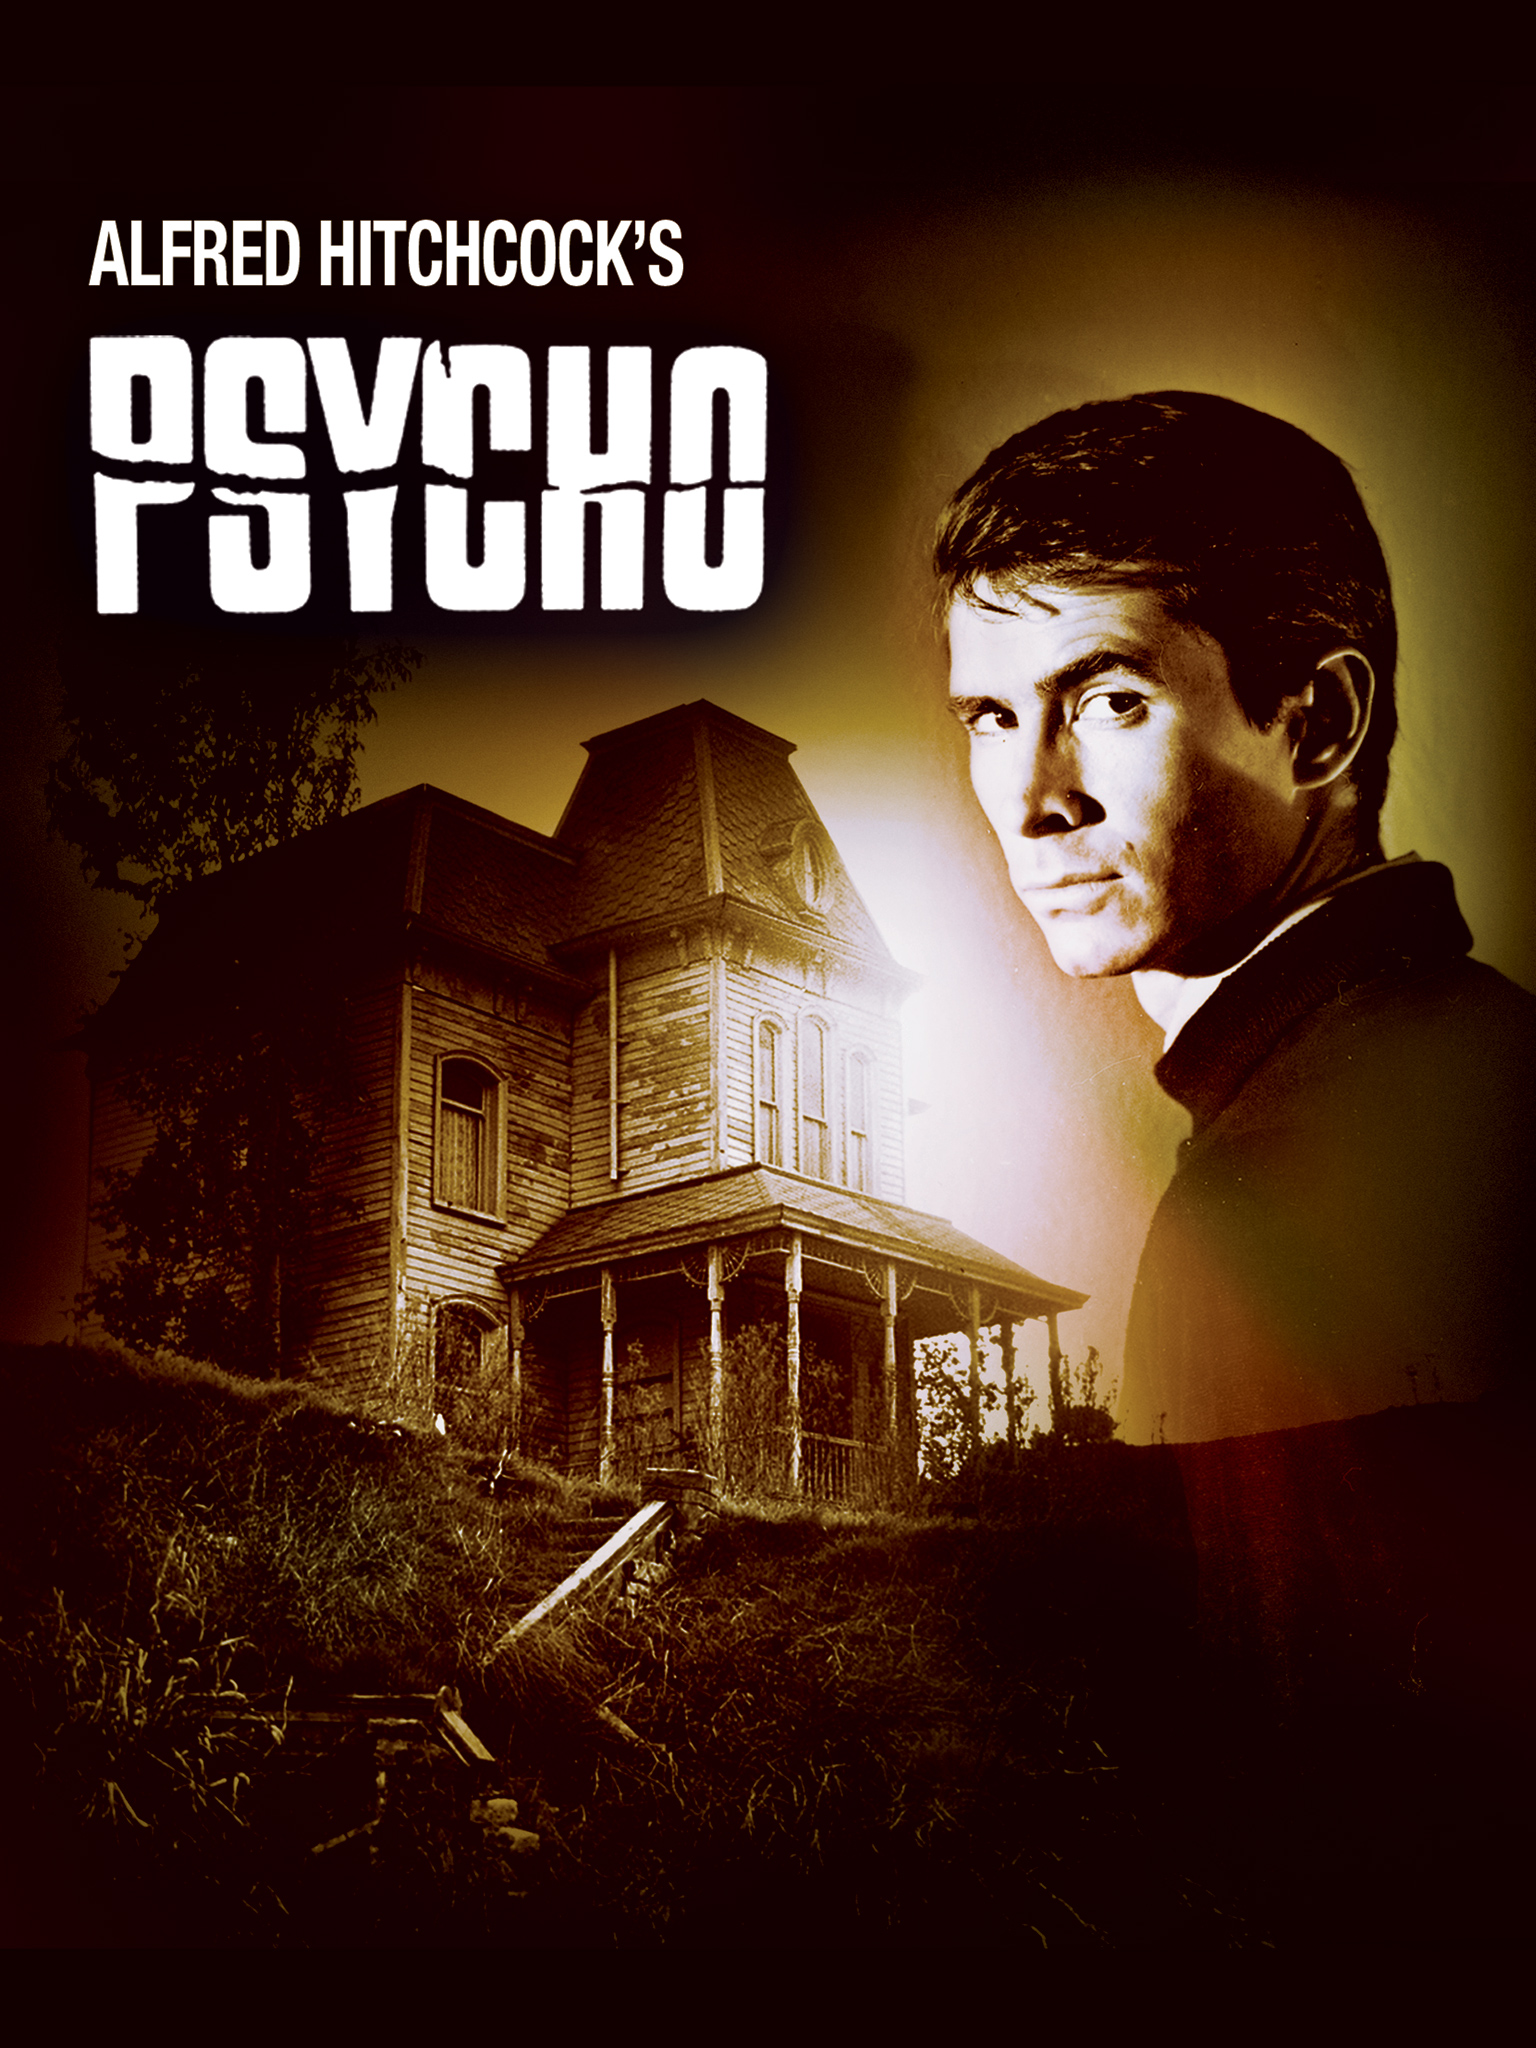 image of psycho film poster